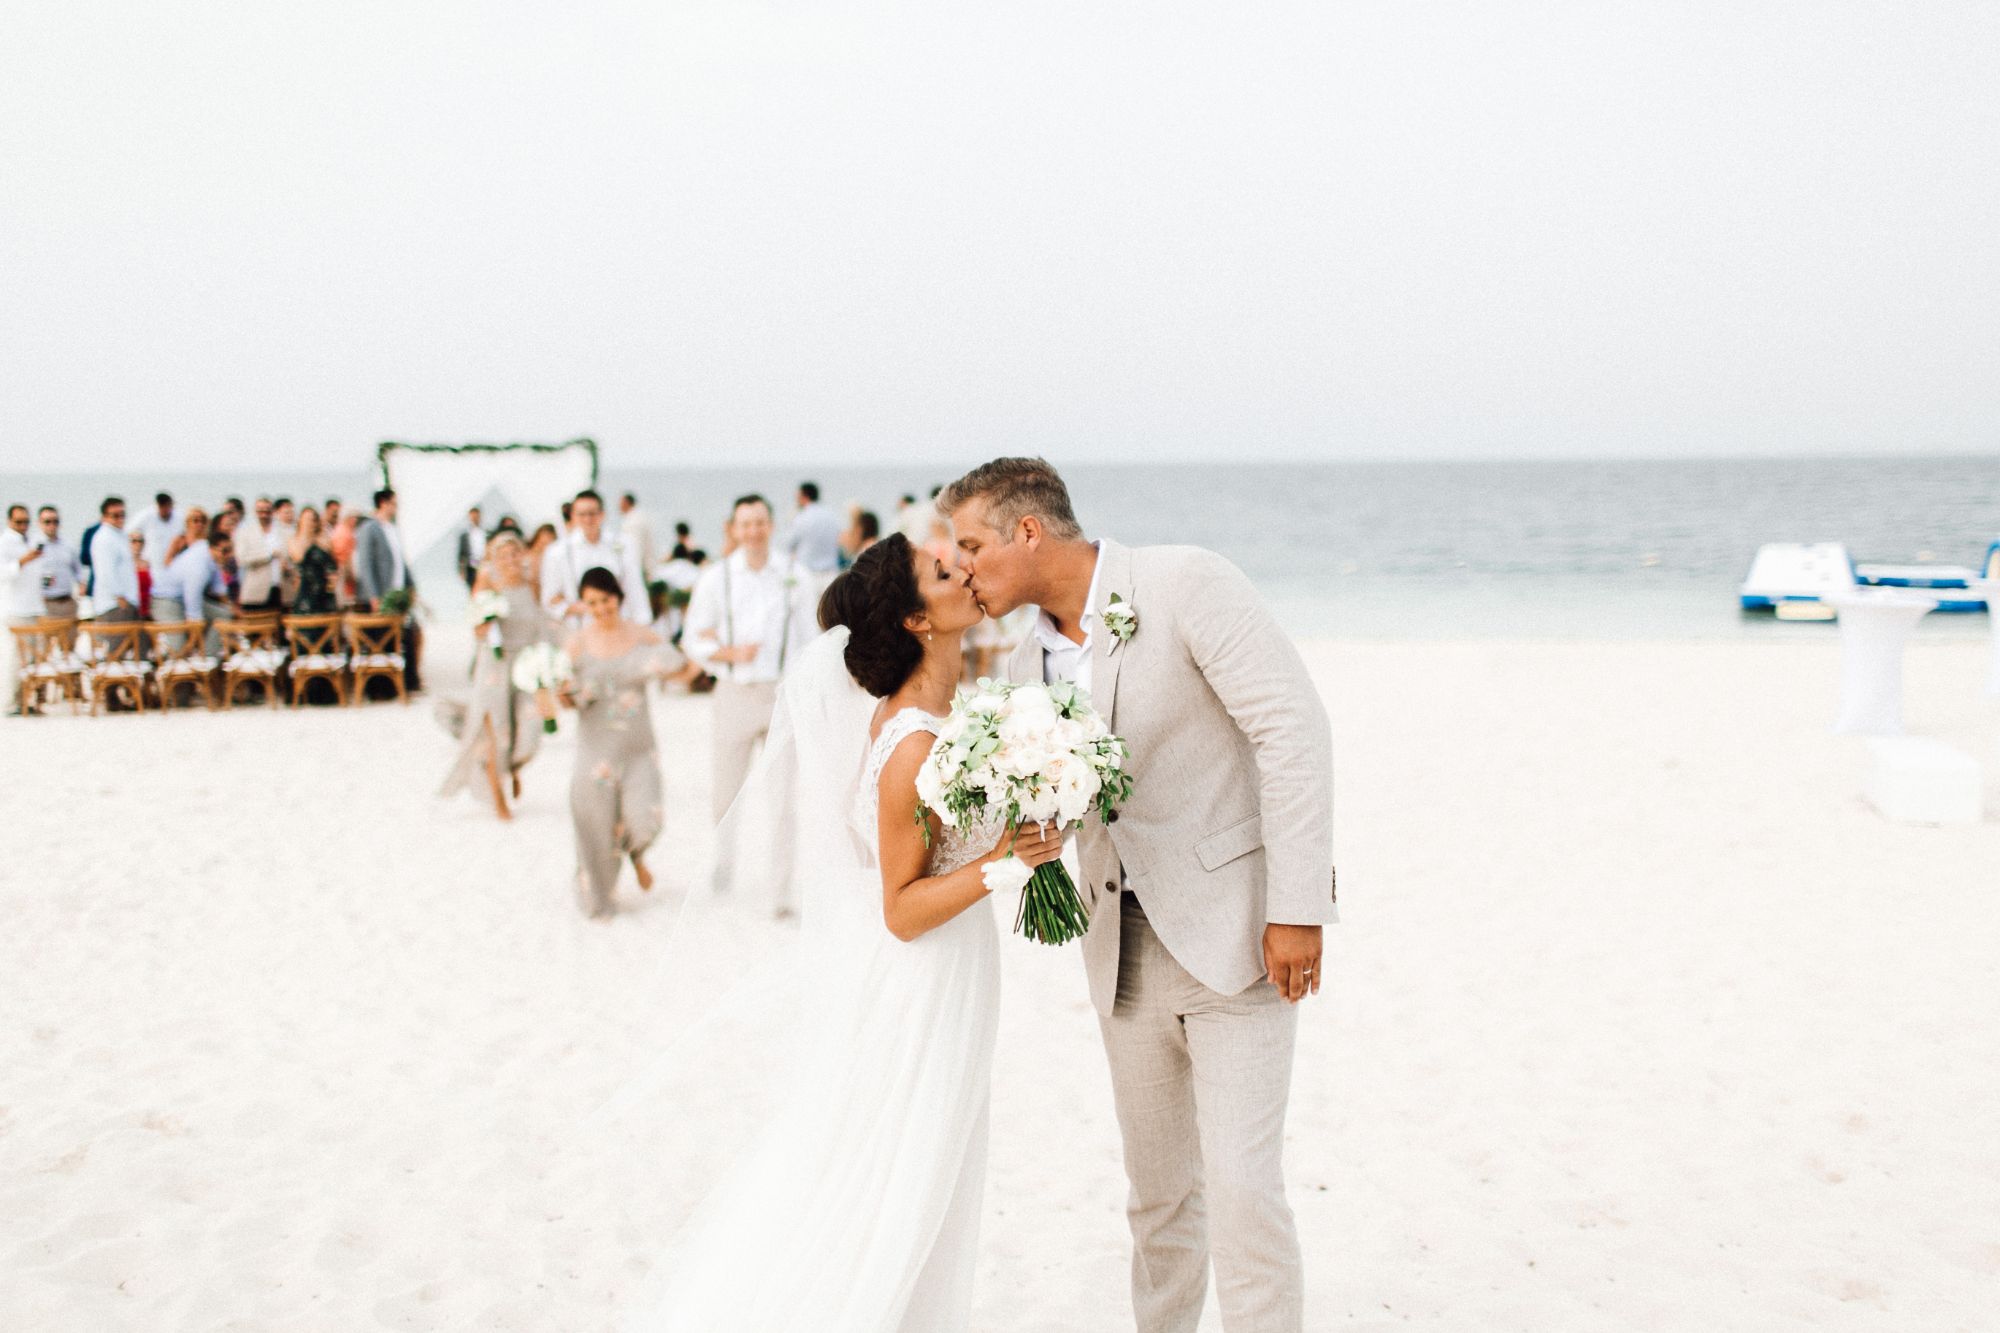 Newlywed couple kissing after beach ceremony with guests in background.